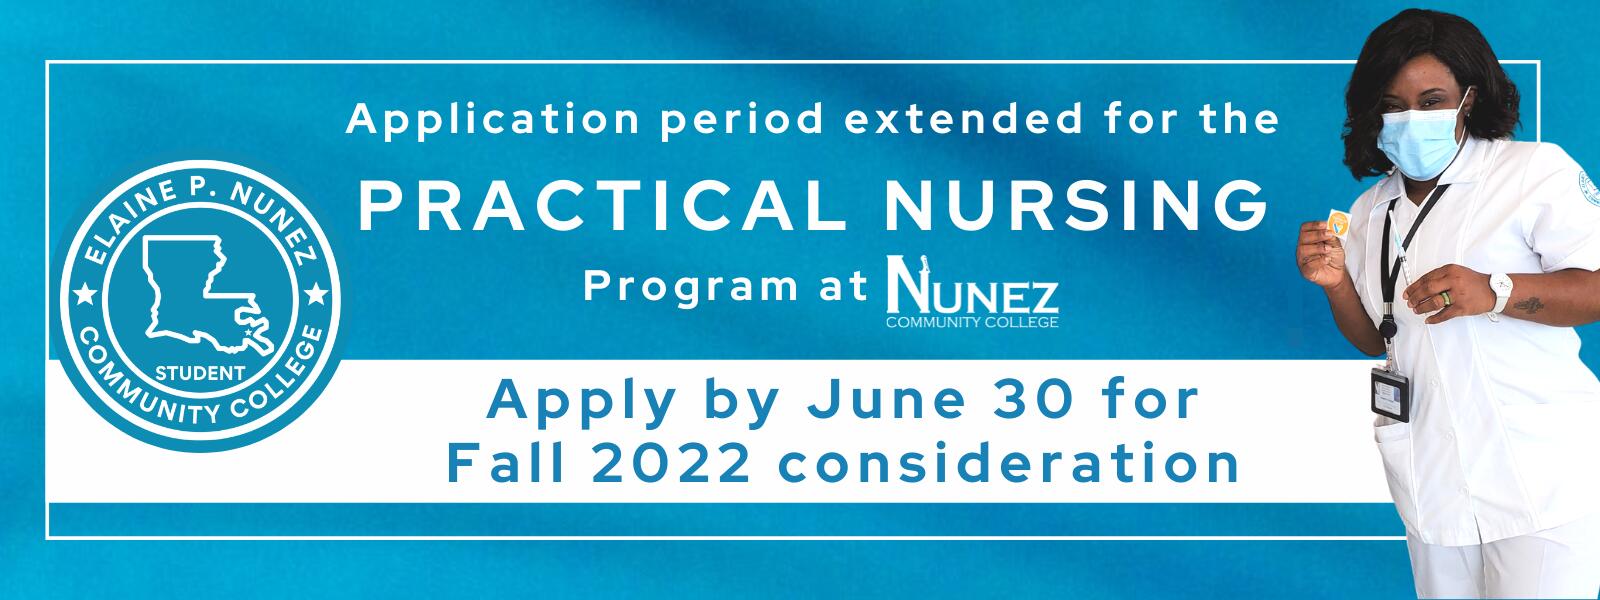 Practical Nursing Application Extension:  Apply by June 30th for Fall 2022 Consideration - Click Here for the Application